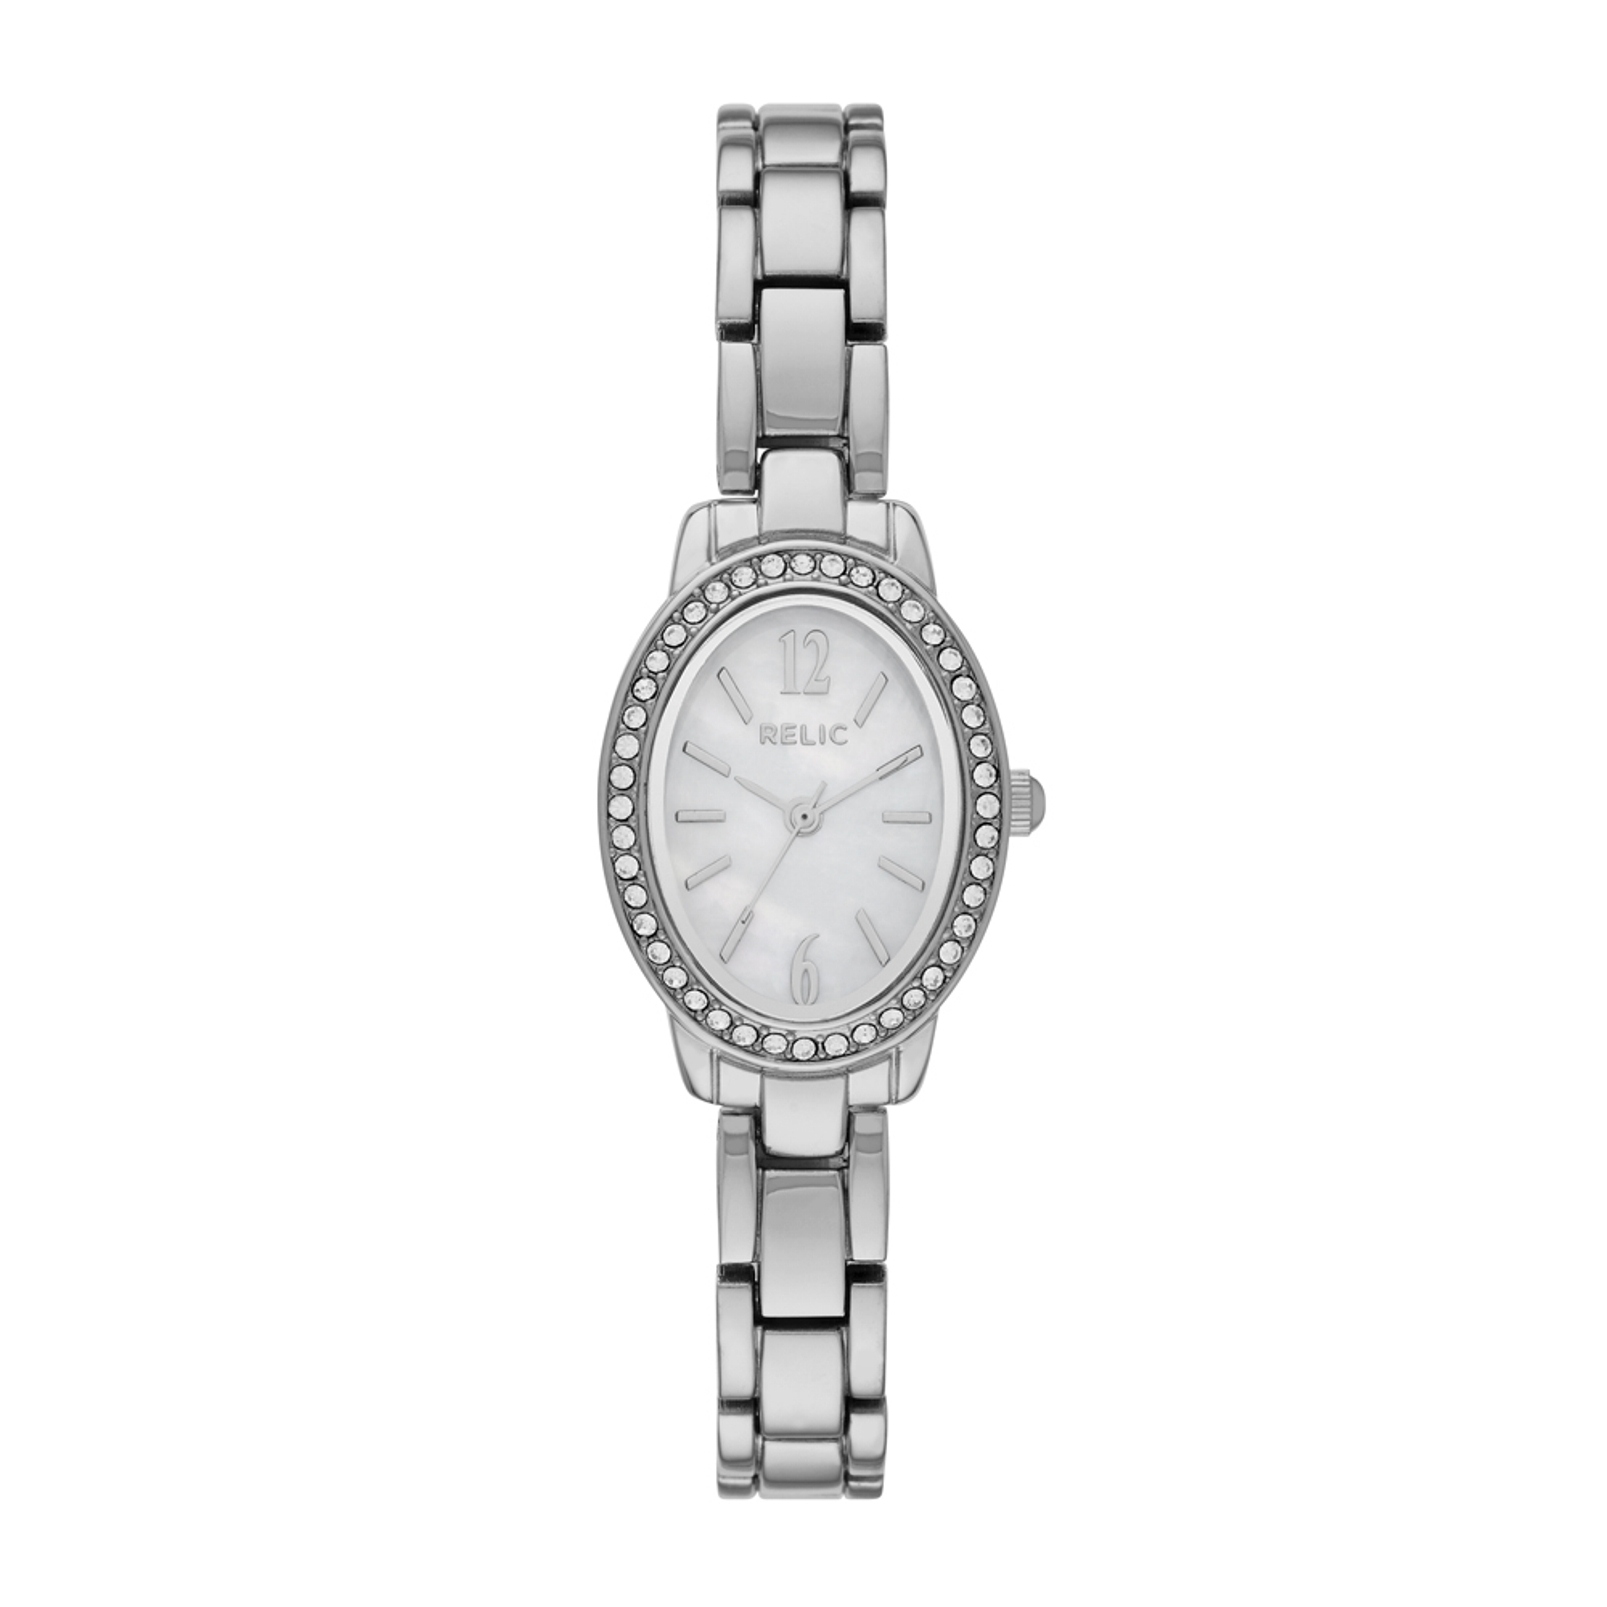 Relic Silvertone Natalie Bracelet Watch with Mother of Pearl Dial